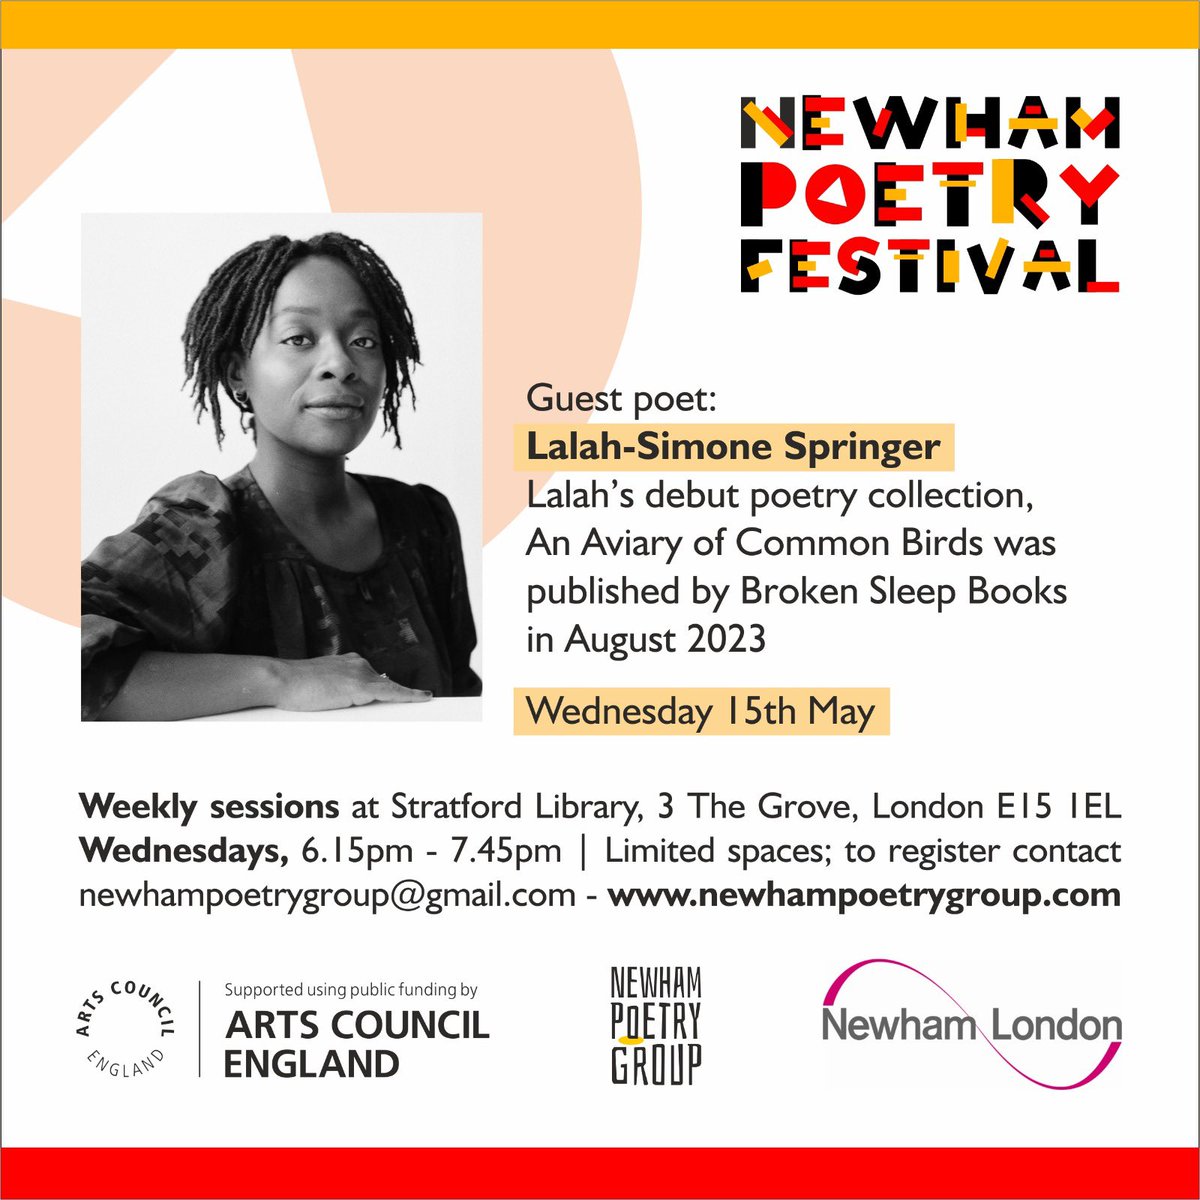 Today we have Special guest poet 
Lalah-Simone Springer - session is open to registered members only - To register please email newhampoetrygroup@gmail #PoetryForAll  #PoetryFest #NewhamPoetryFest is possible Thanks to @ace__london #Newhampoets #newhamculture